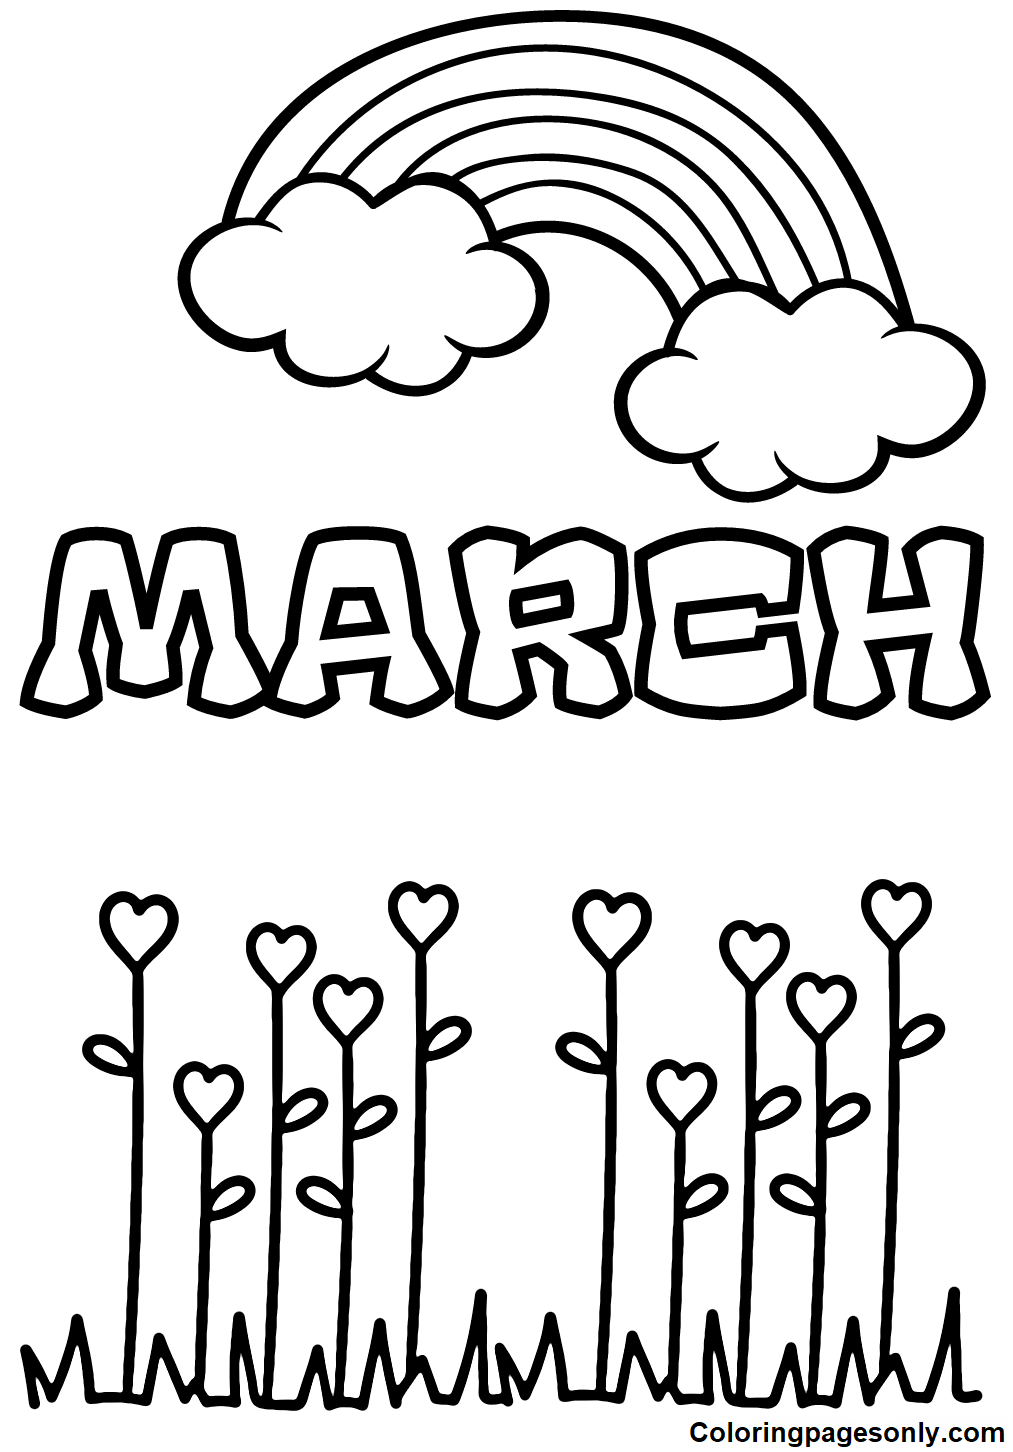 March Coloring Pages Printable for Free Download